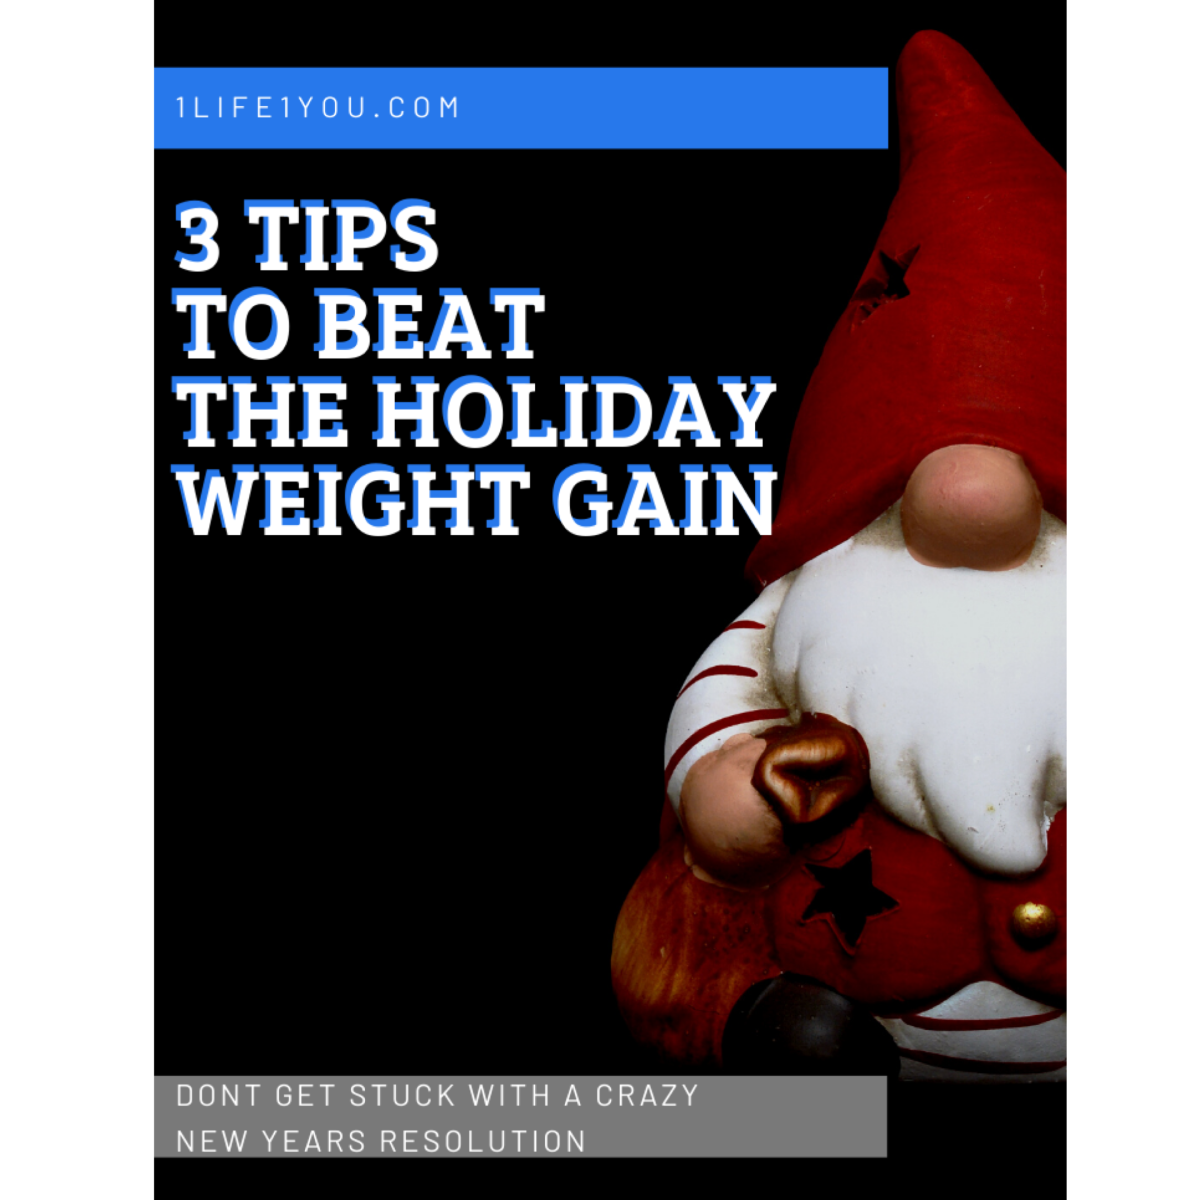 3 Tips To Beat The Holiday Weight Gain